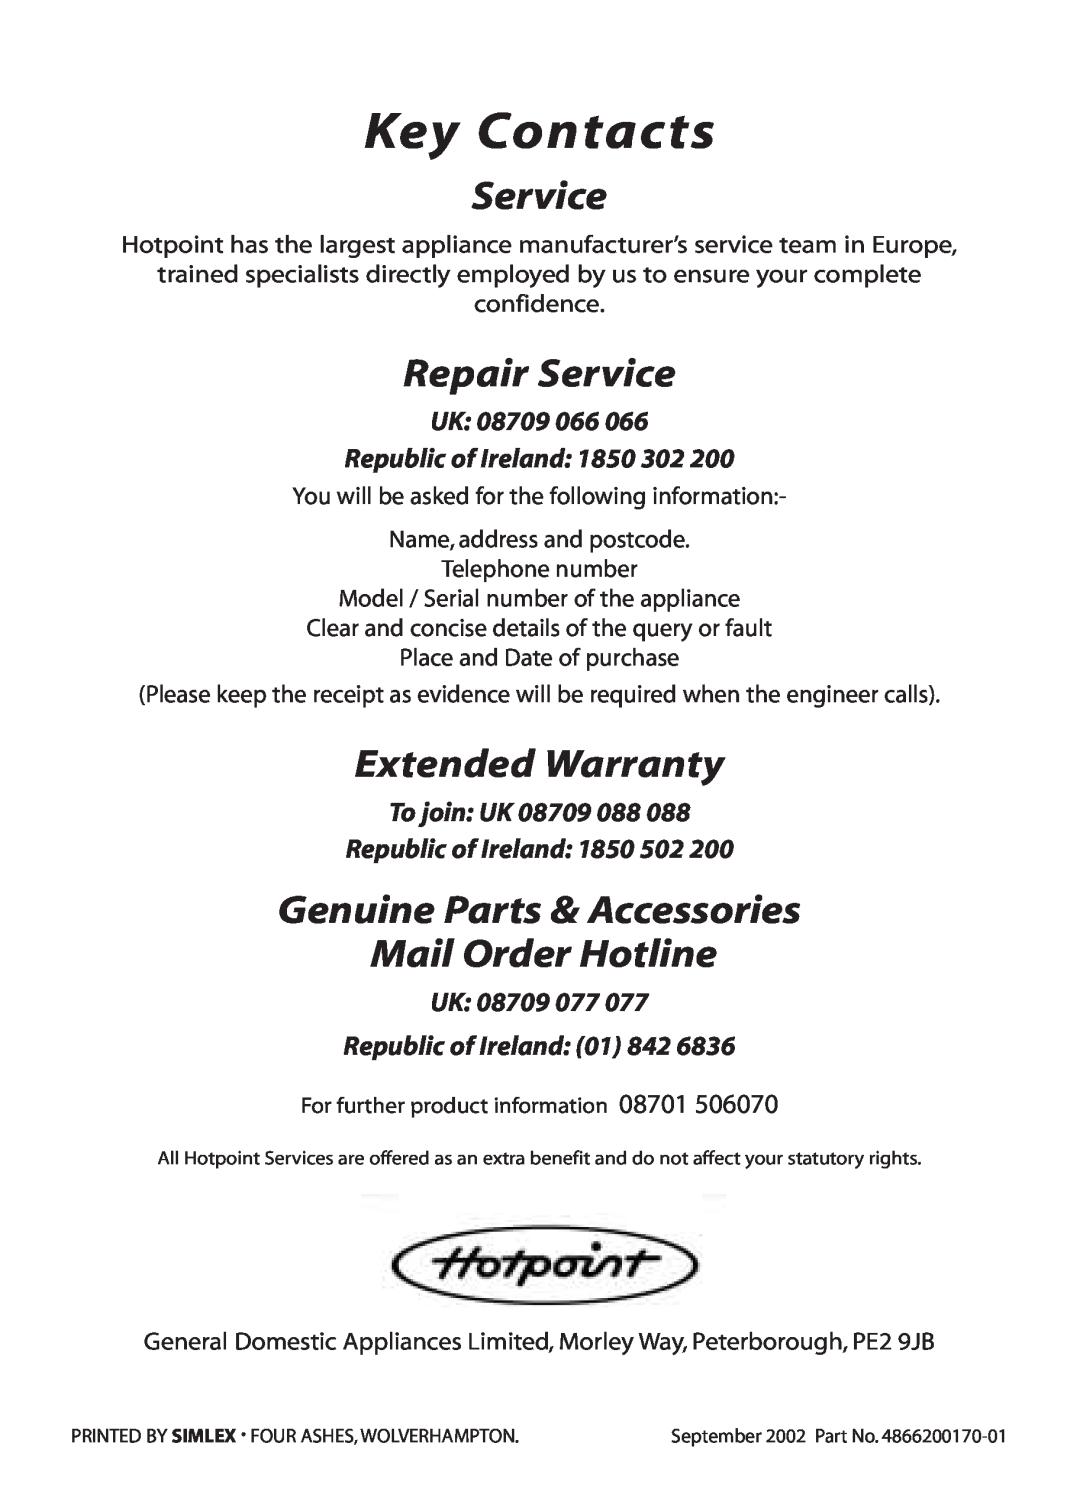 Hotpoint EG52 Key Contacts, Repair Service, Extended Warranty, Genuine Parts & Accessories Mail Order Hotline 